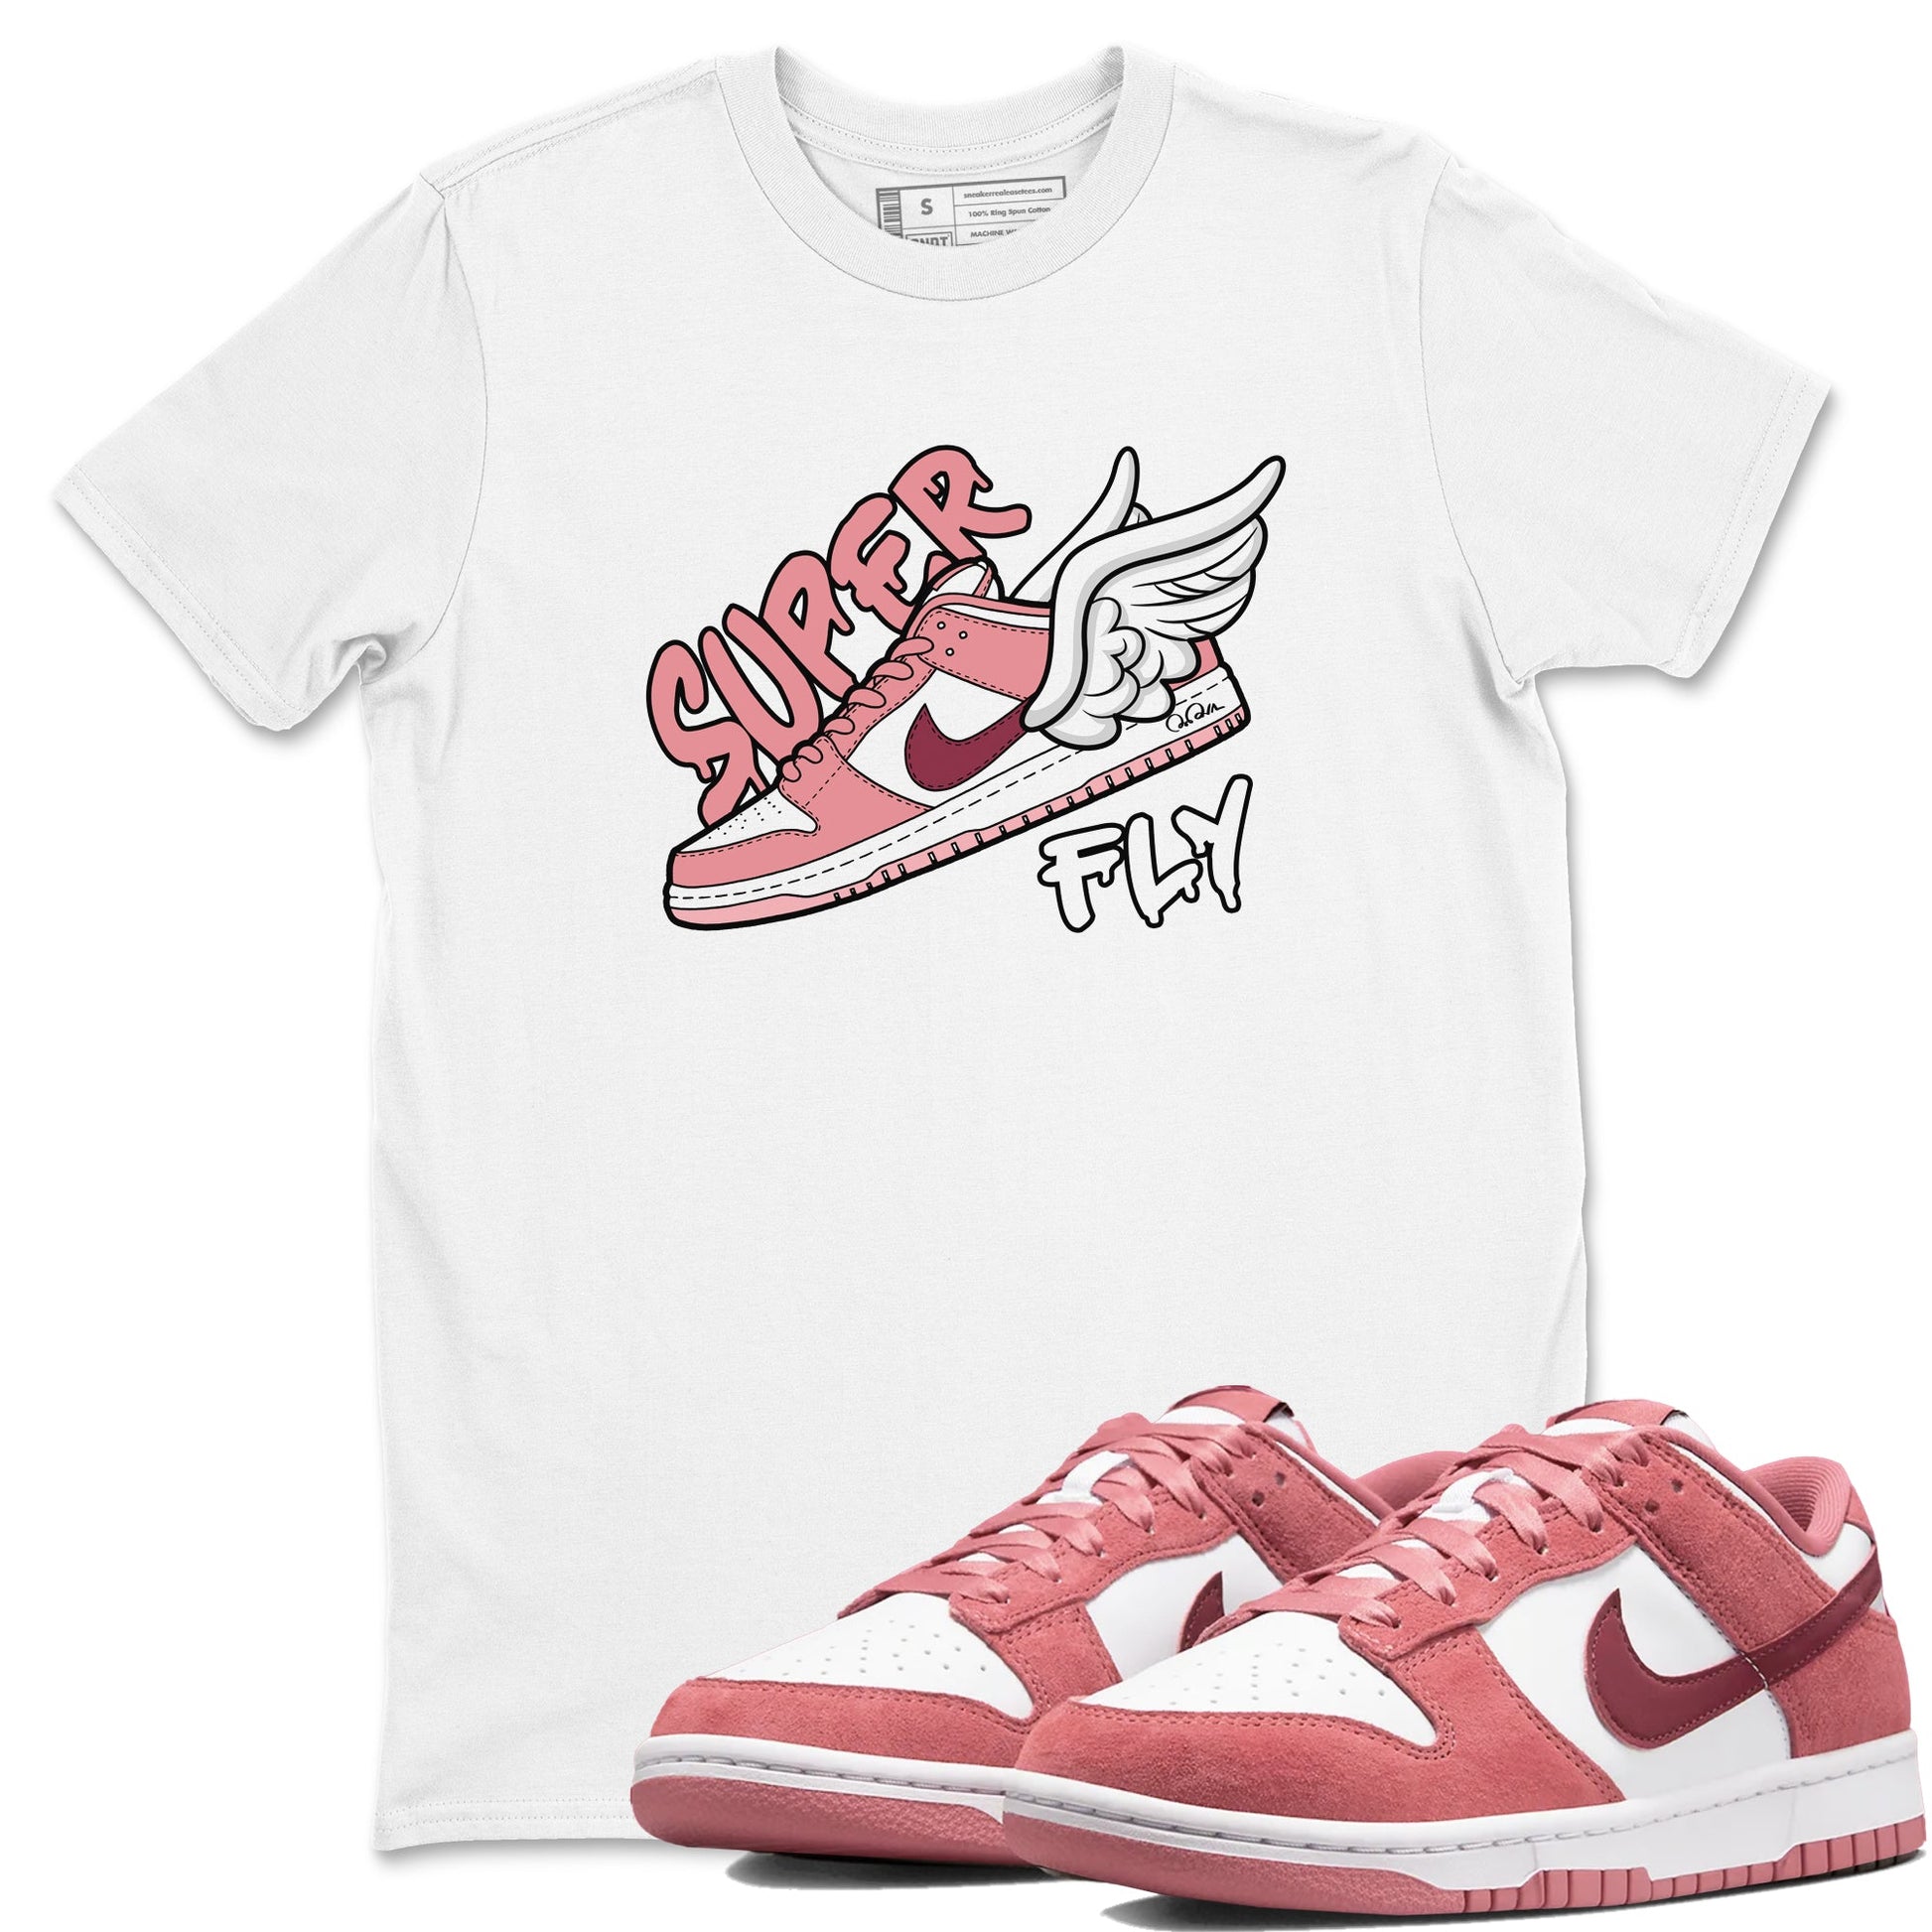 Dunk Valentines Day 2024 shirt to match jordans Super Fly sneaker tees Dunk Happy Valentines Day 2024 SNRT Sneaker Release Tees Unisex White 1 T-Shirt